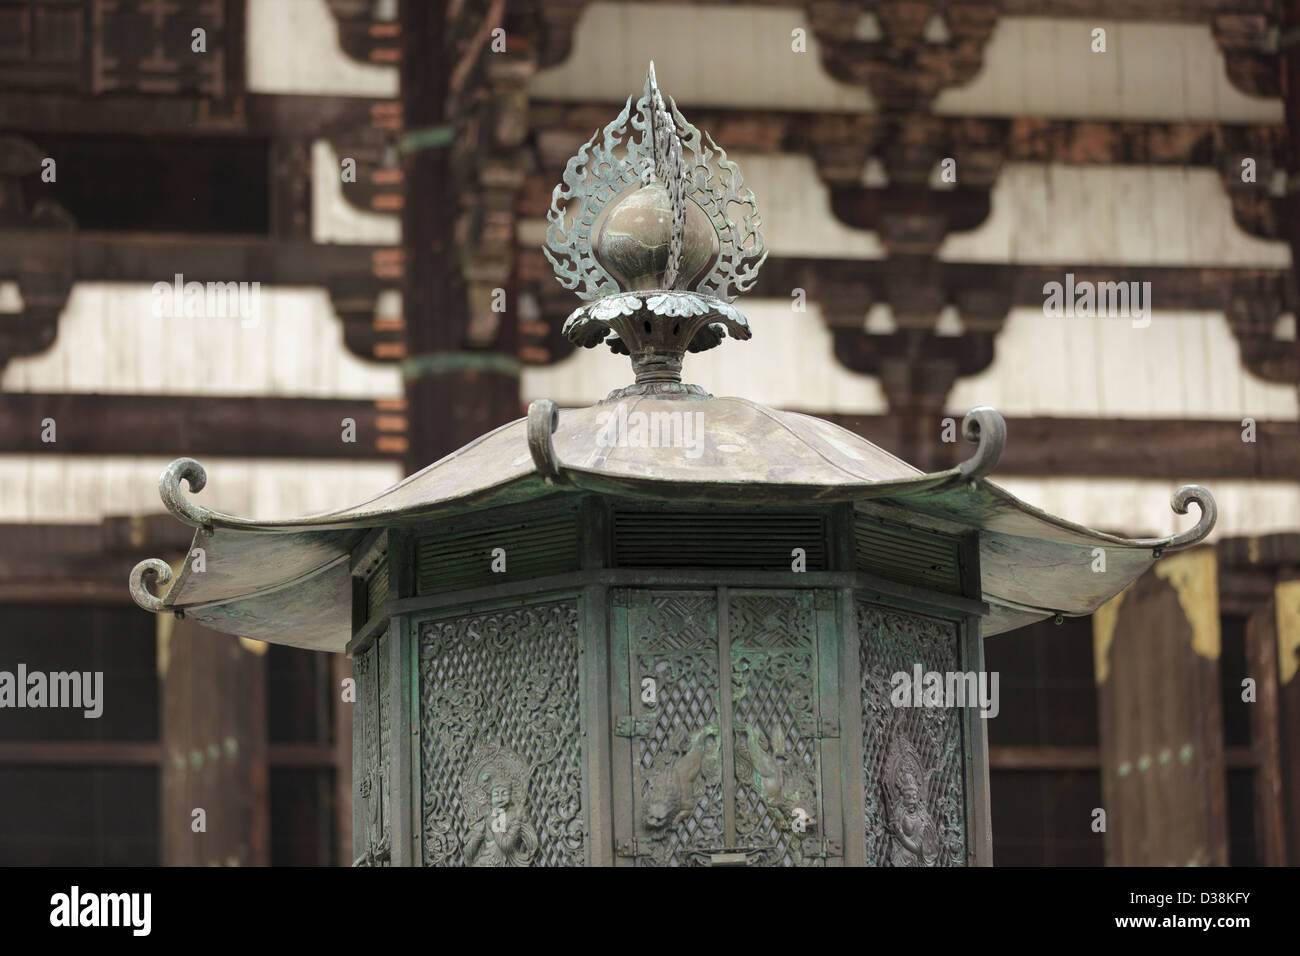 Detail of the big incense burner in the courtyard of the Todaiji temple in Nara, Japan Stock Photo